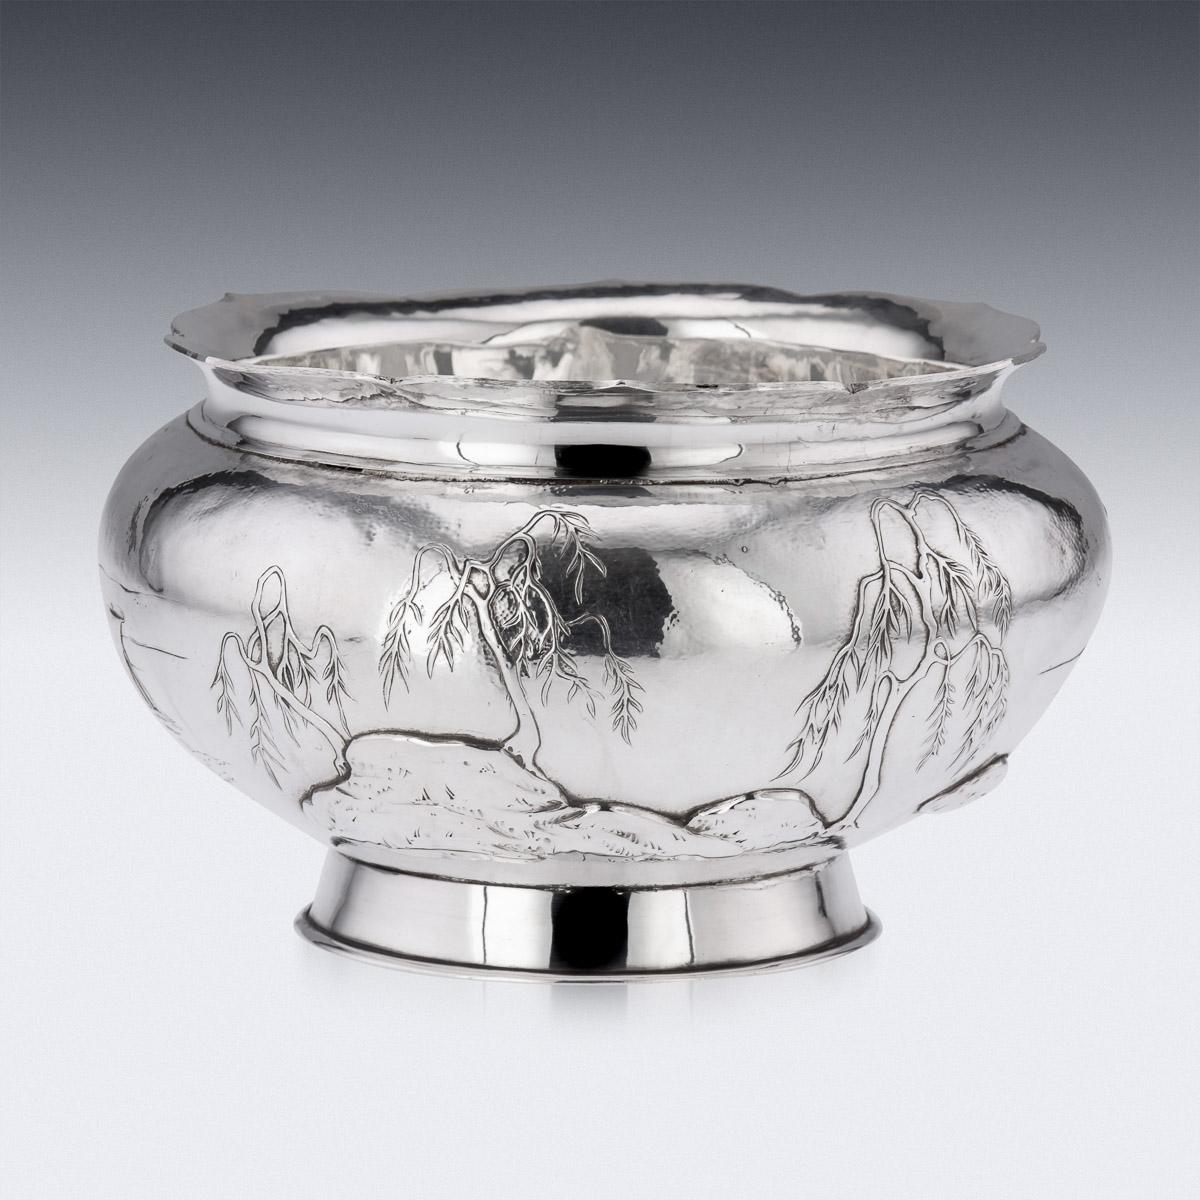 20th Century Meiji Japanese Solid Silver Fuji Mountain Bowl, c.1900 In Good Condition For Sale In Royal Tunbridge Wells, Kent